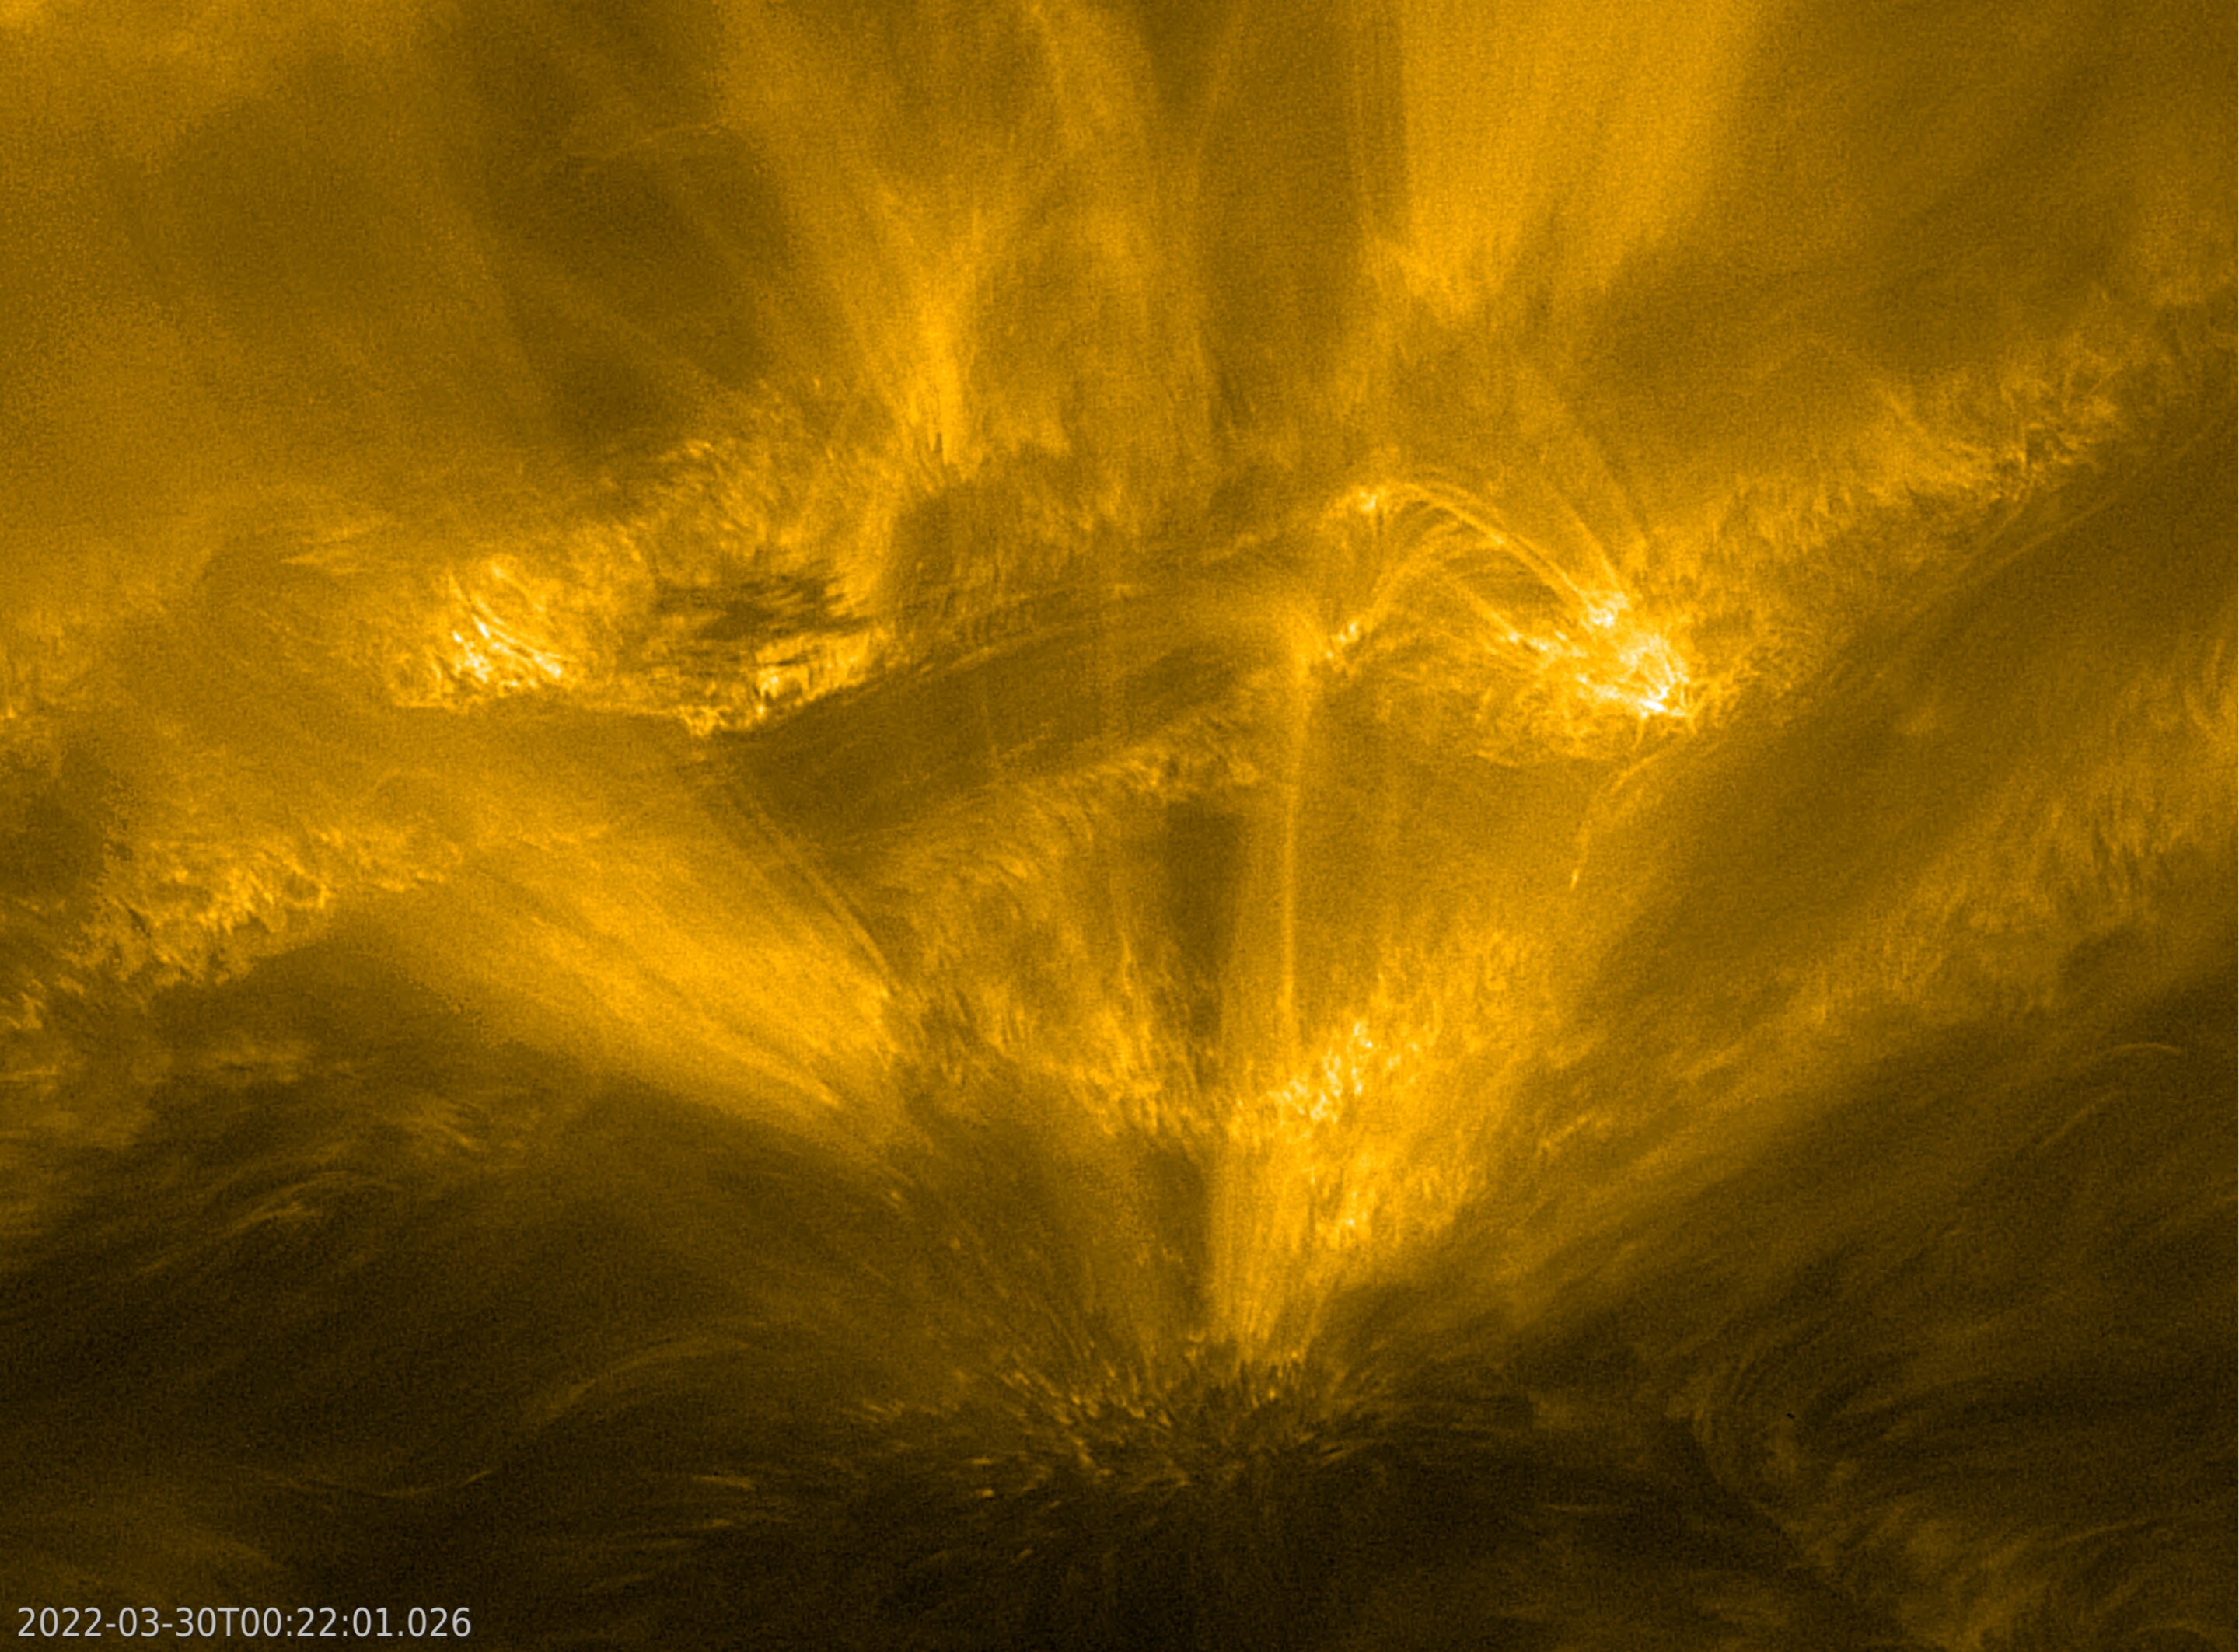 The sun as you've never seen it before